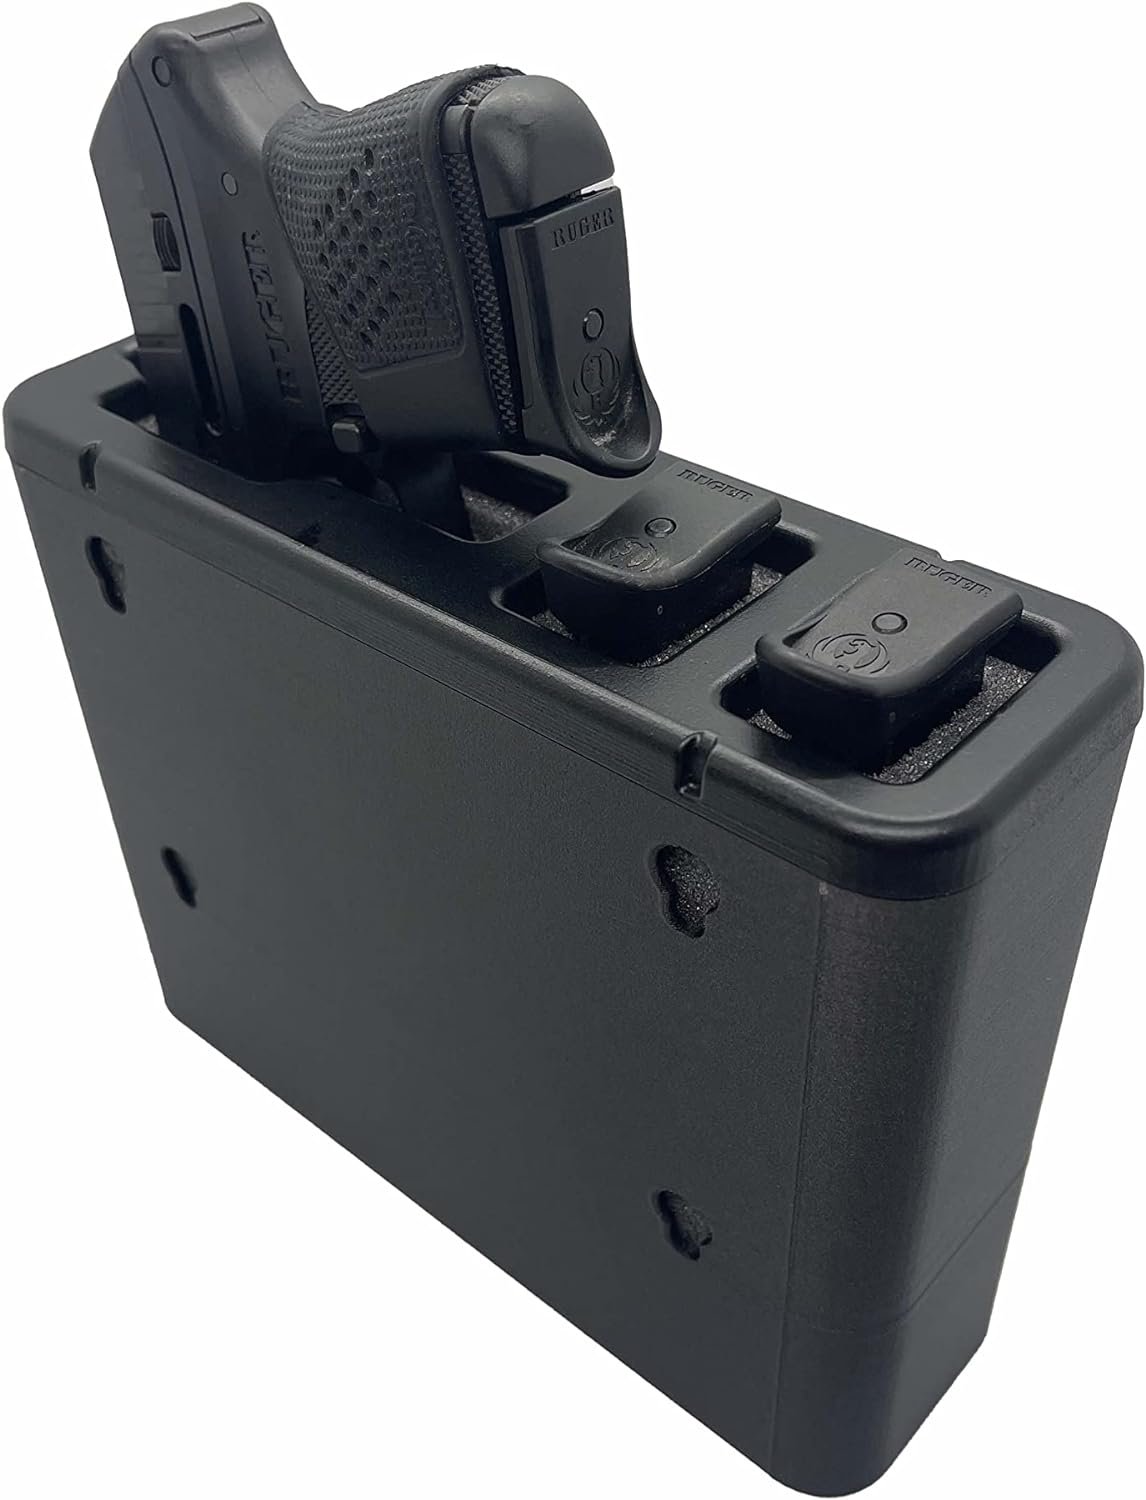 TacBox FS Large Pistol Holster Box Review